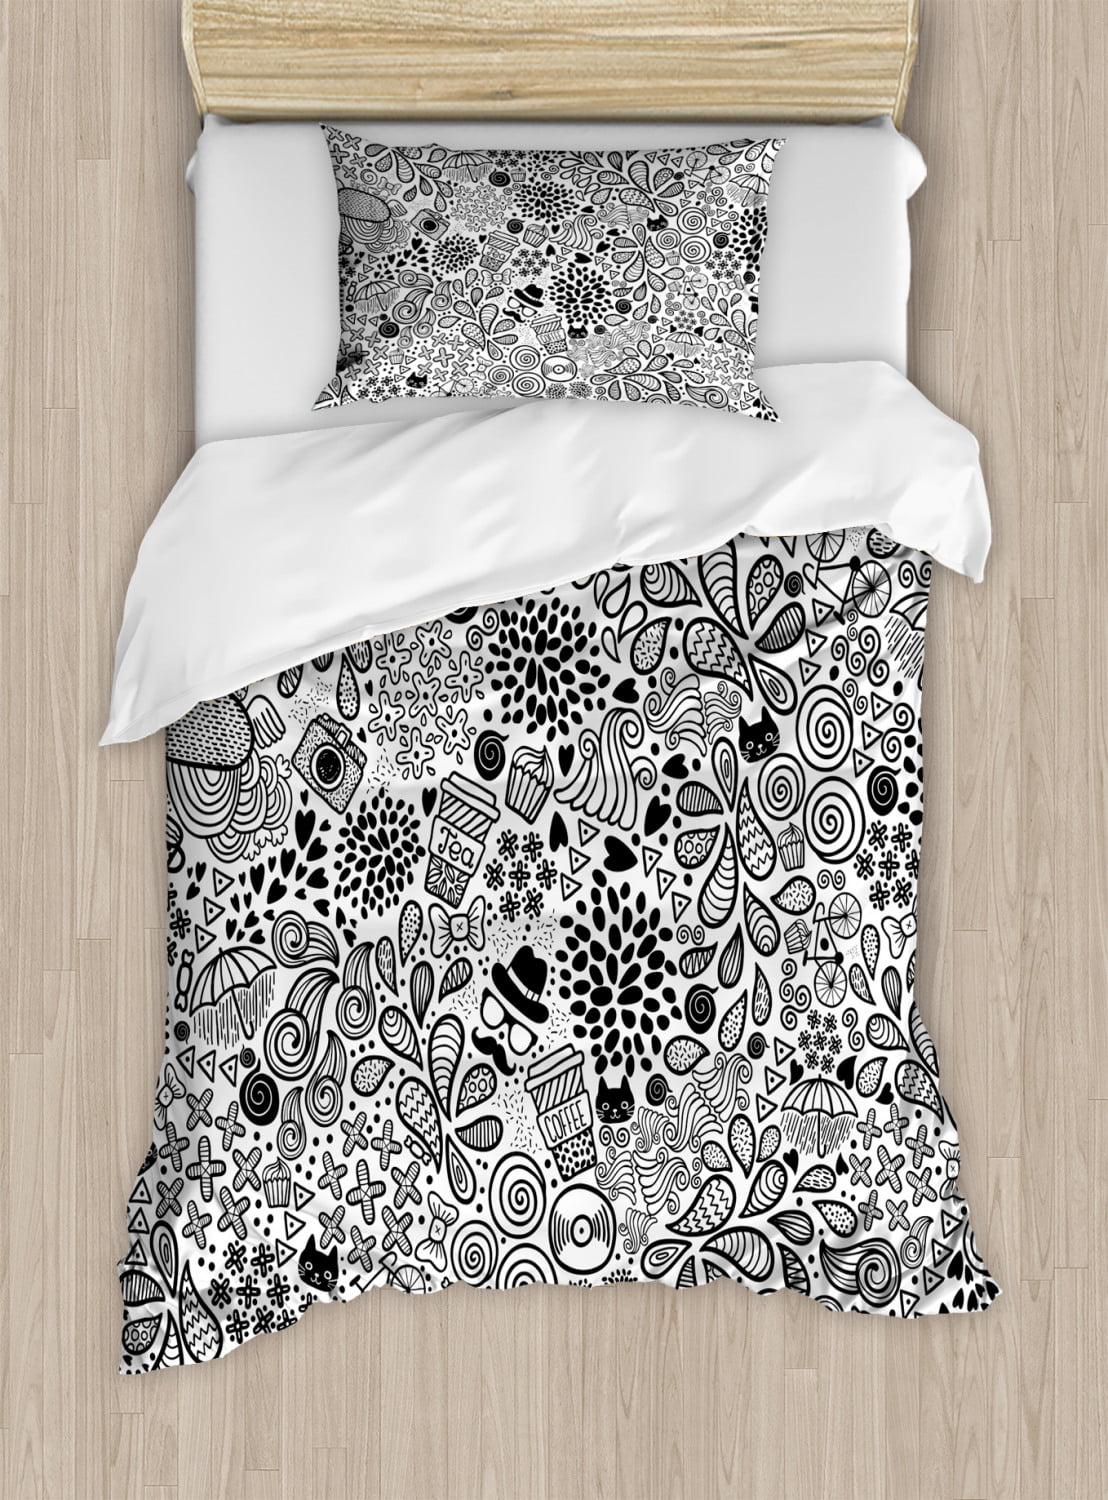 100% Cotton Doodle Single Bedding with Wash Out Fabric Pens 